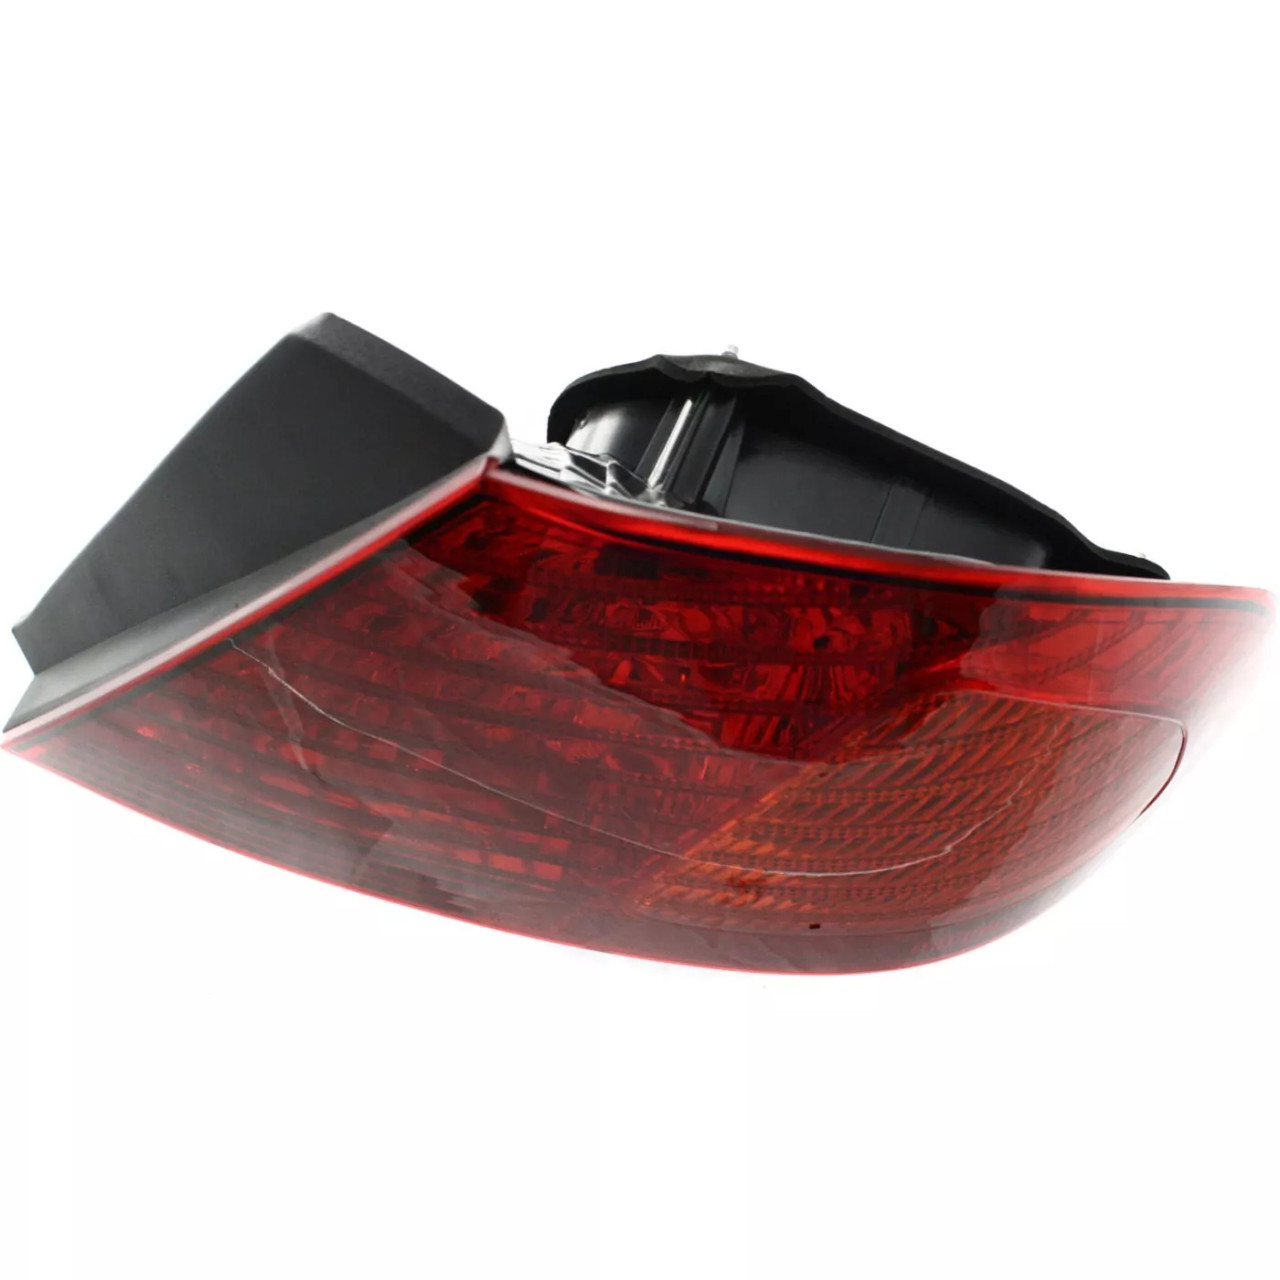 Halogen Tail Light For 2000-2002 Toyota Avalon Right Amber & Red Lens w/ Bulb(s)